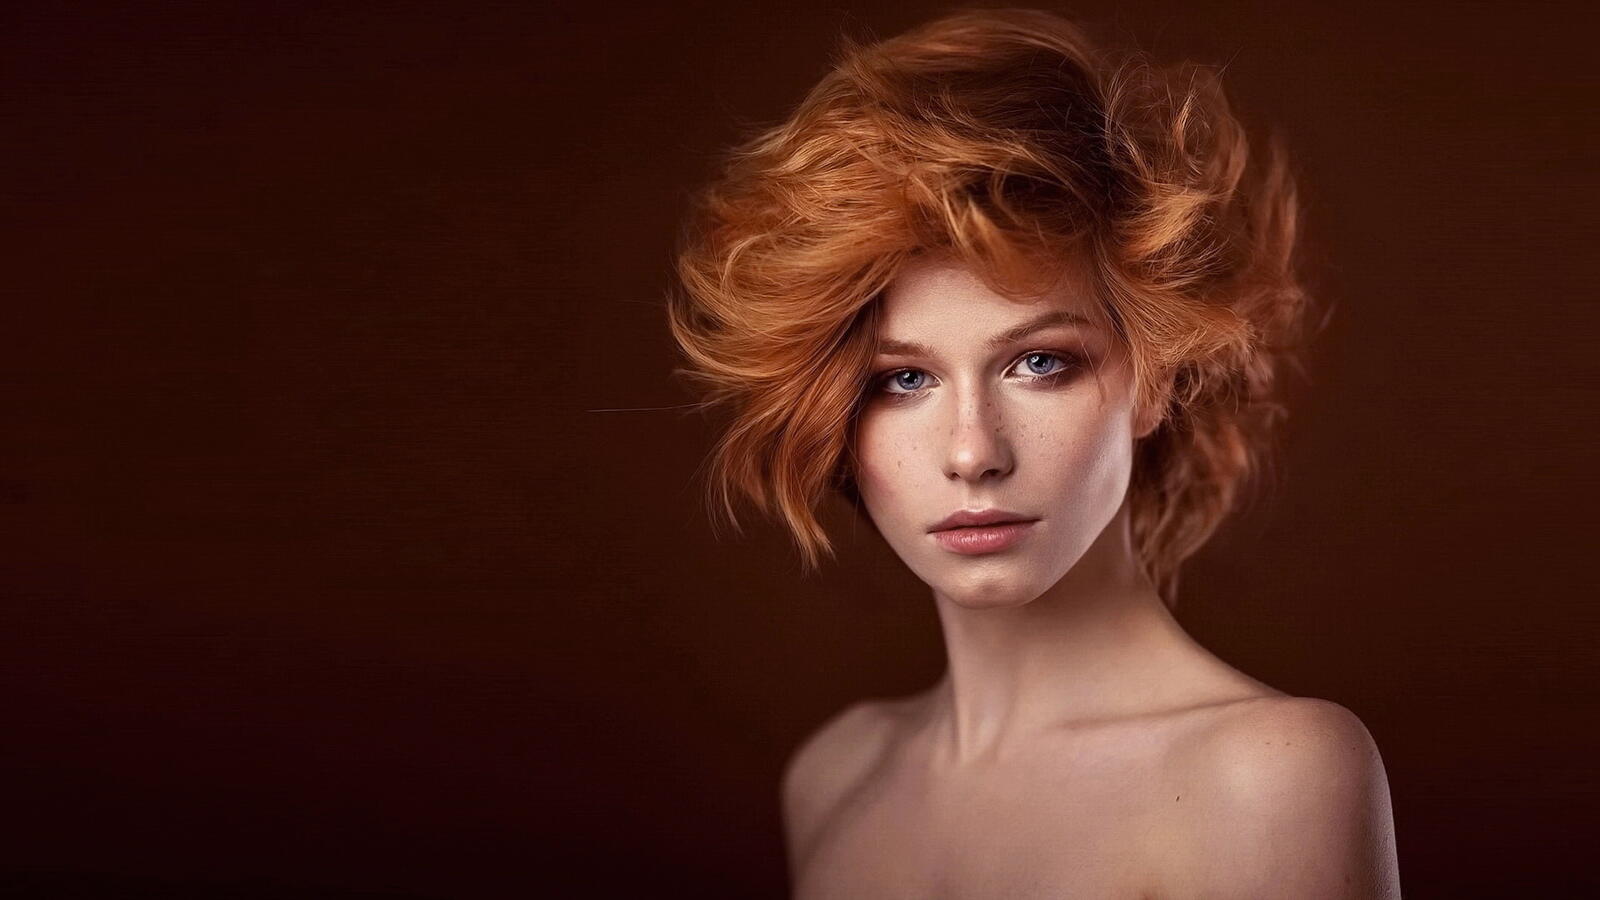 Free photo Portrait of a redheaded girl